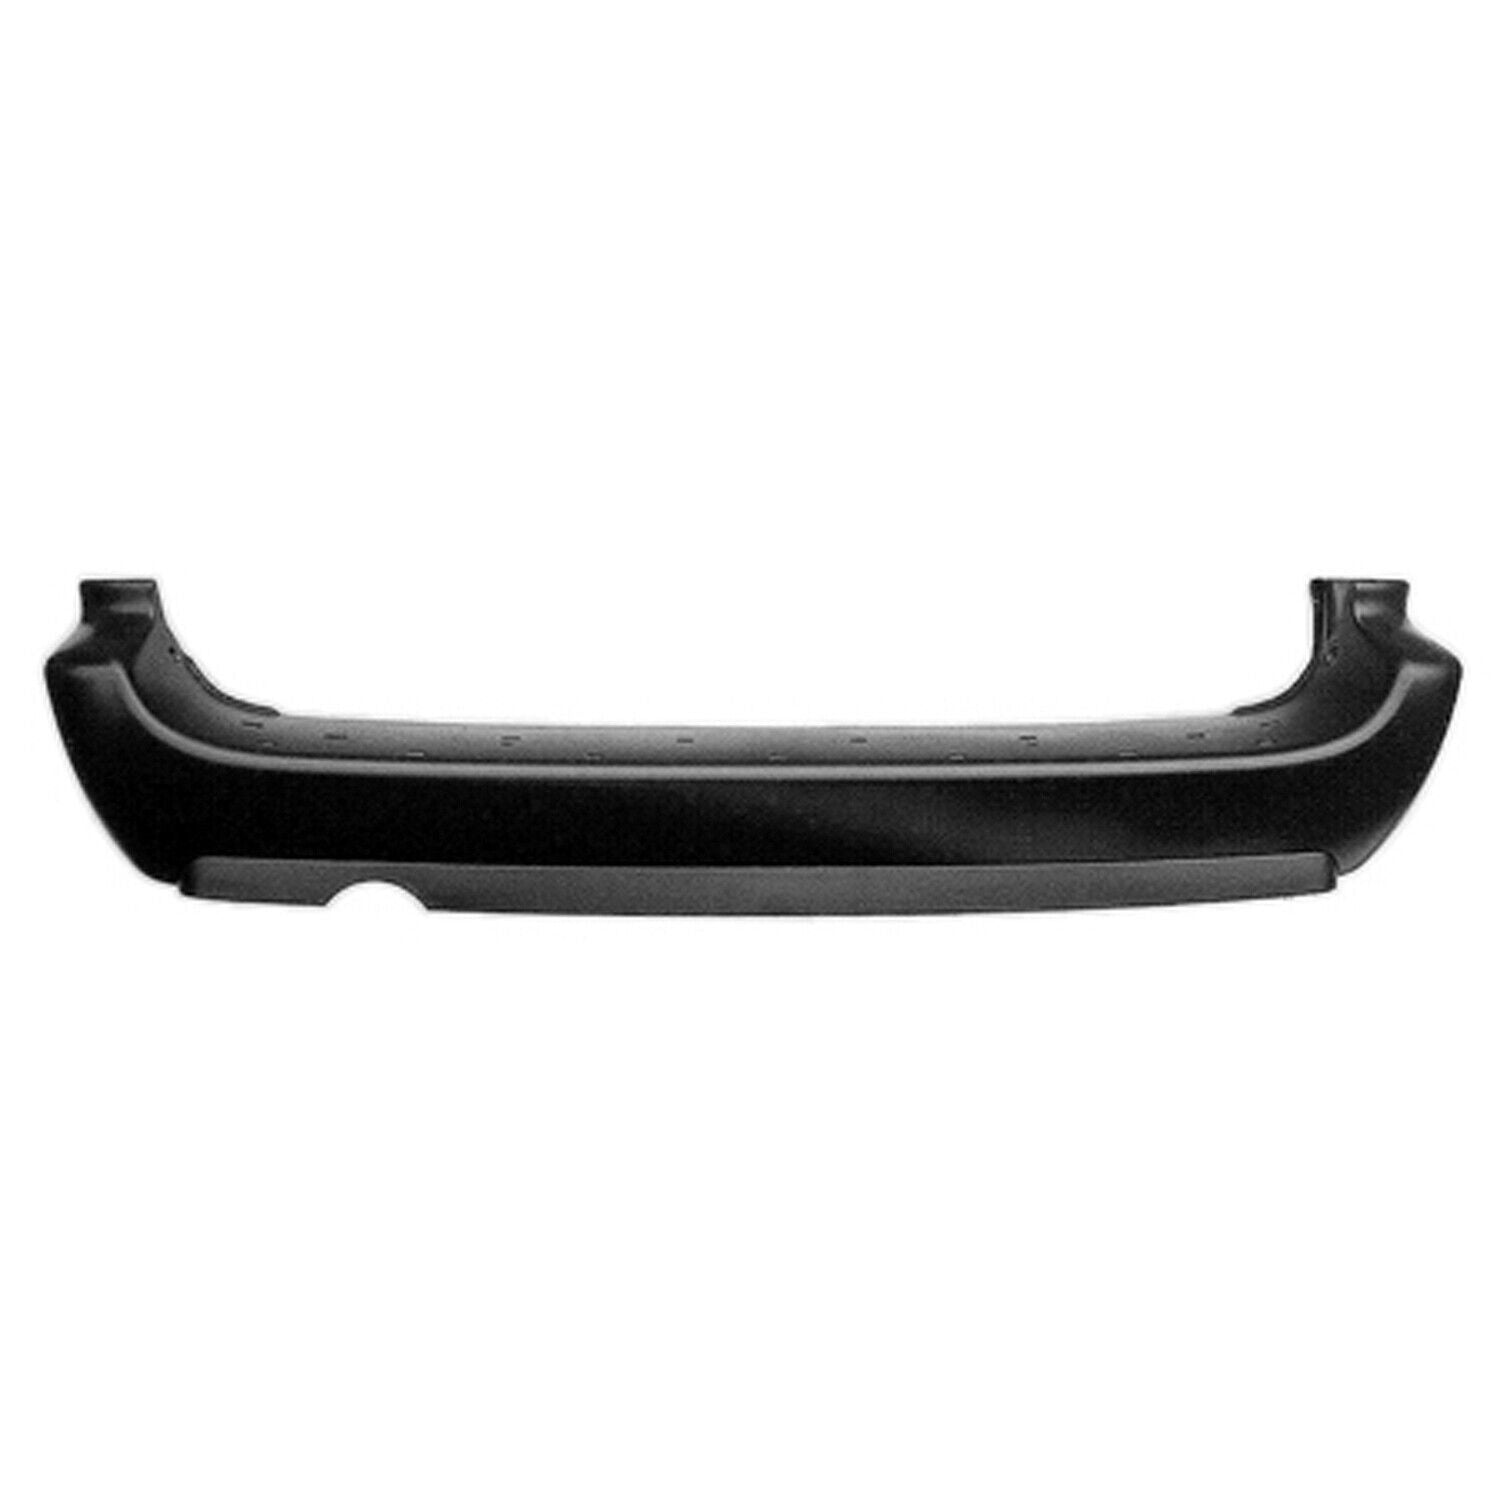 2005-2007 CHRYSLER Town & Country; Rear Bumper Cover; w/o CHR Mldg w/ trim w/Stow w/o sensor Painted to Match